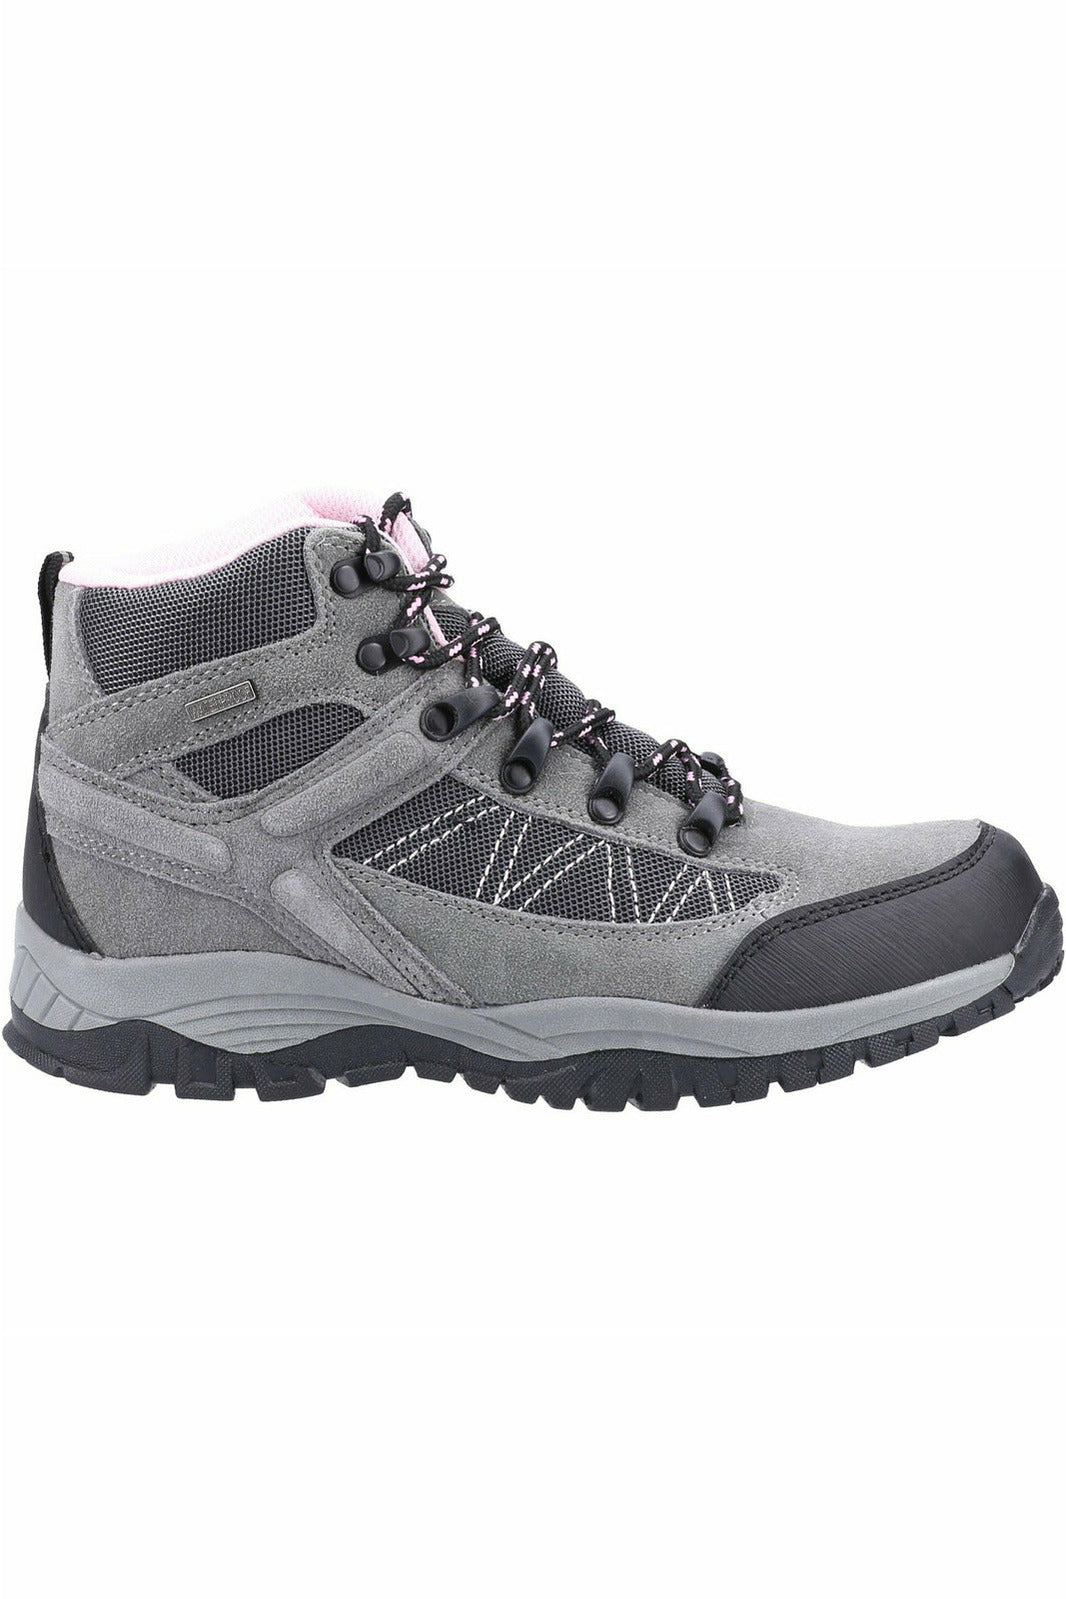 Cotswold - Maisemore Ladies Hiking Boot